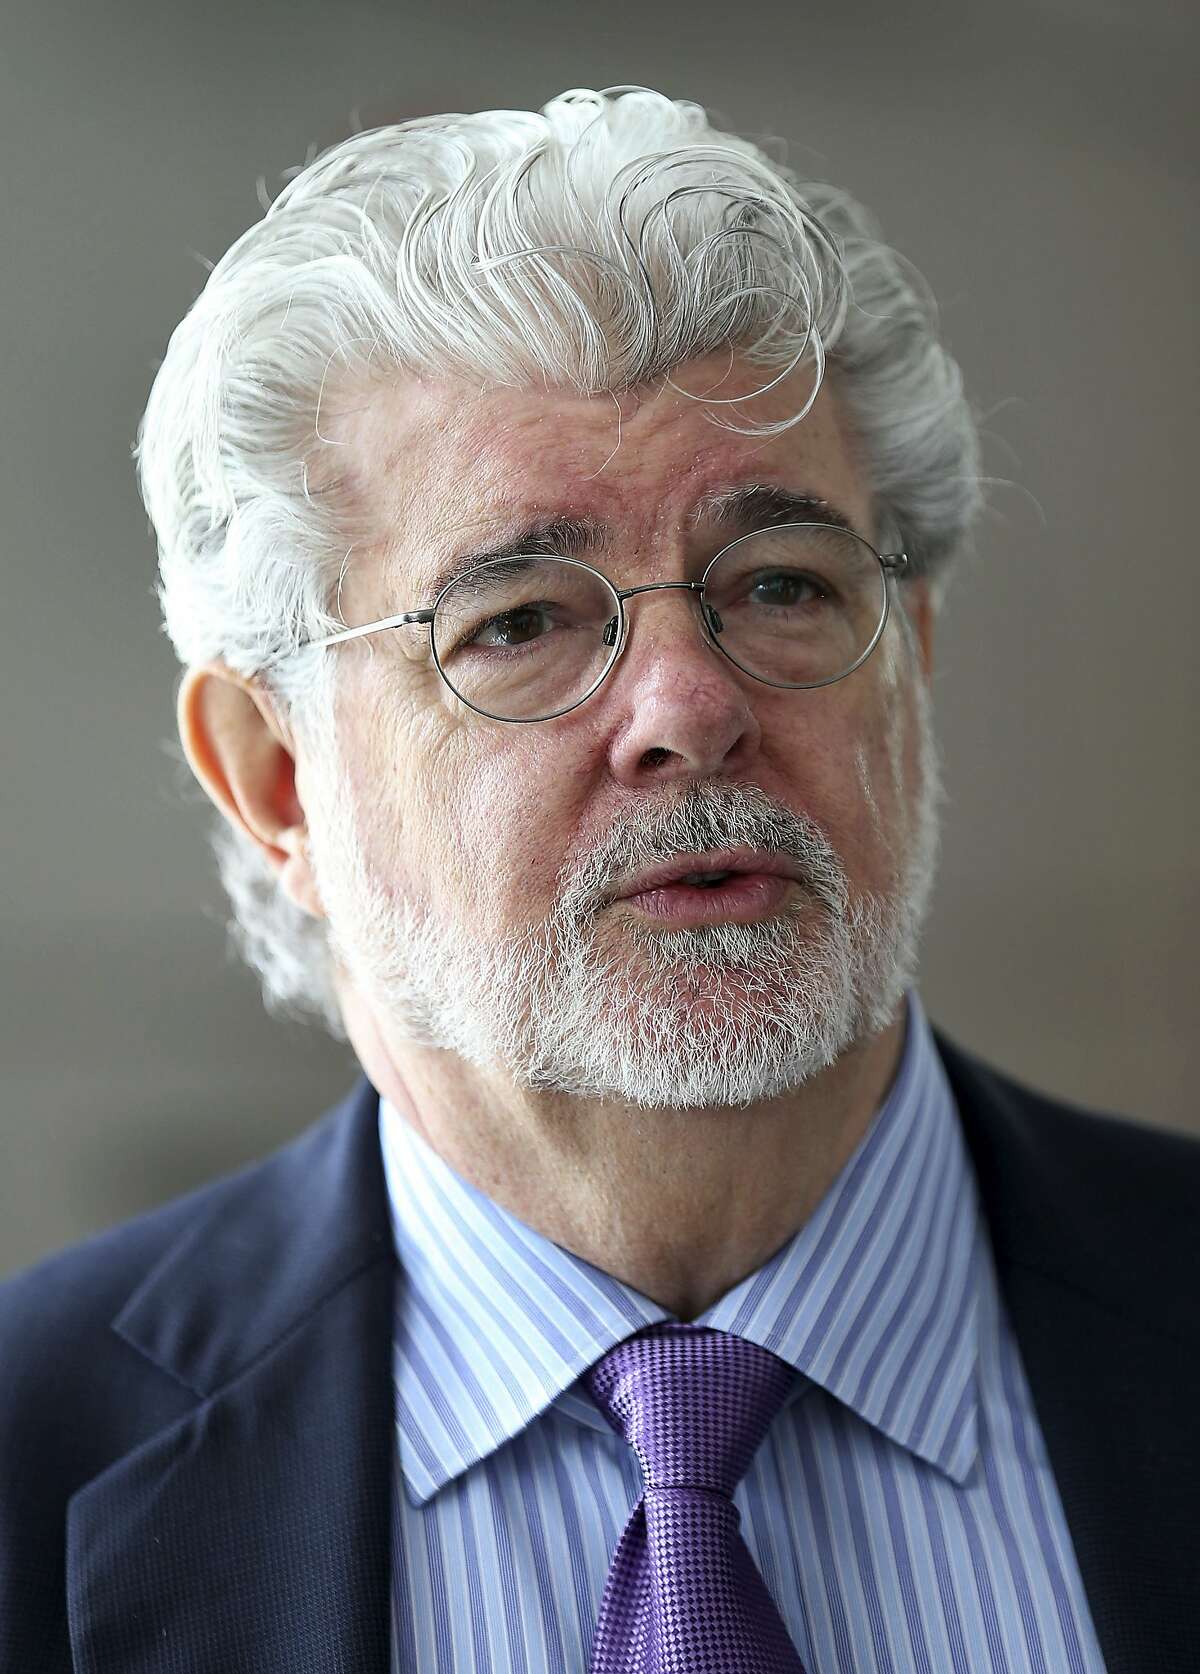 In this Jan. 16, 2014, photo George Lucas speaks in Singapore. For nearly a decade Lucas has been trying to build a museum for his extensive personal art collection. In January, the legendary filmmaker is expected to decide whether he will put the museum in San Francisco or Los Angeles, after other attempts were upended by community opposition. (AP Photo/Wong Maye-E, File)